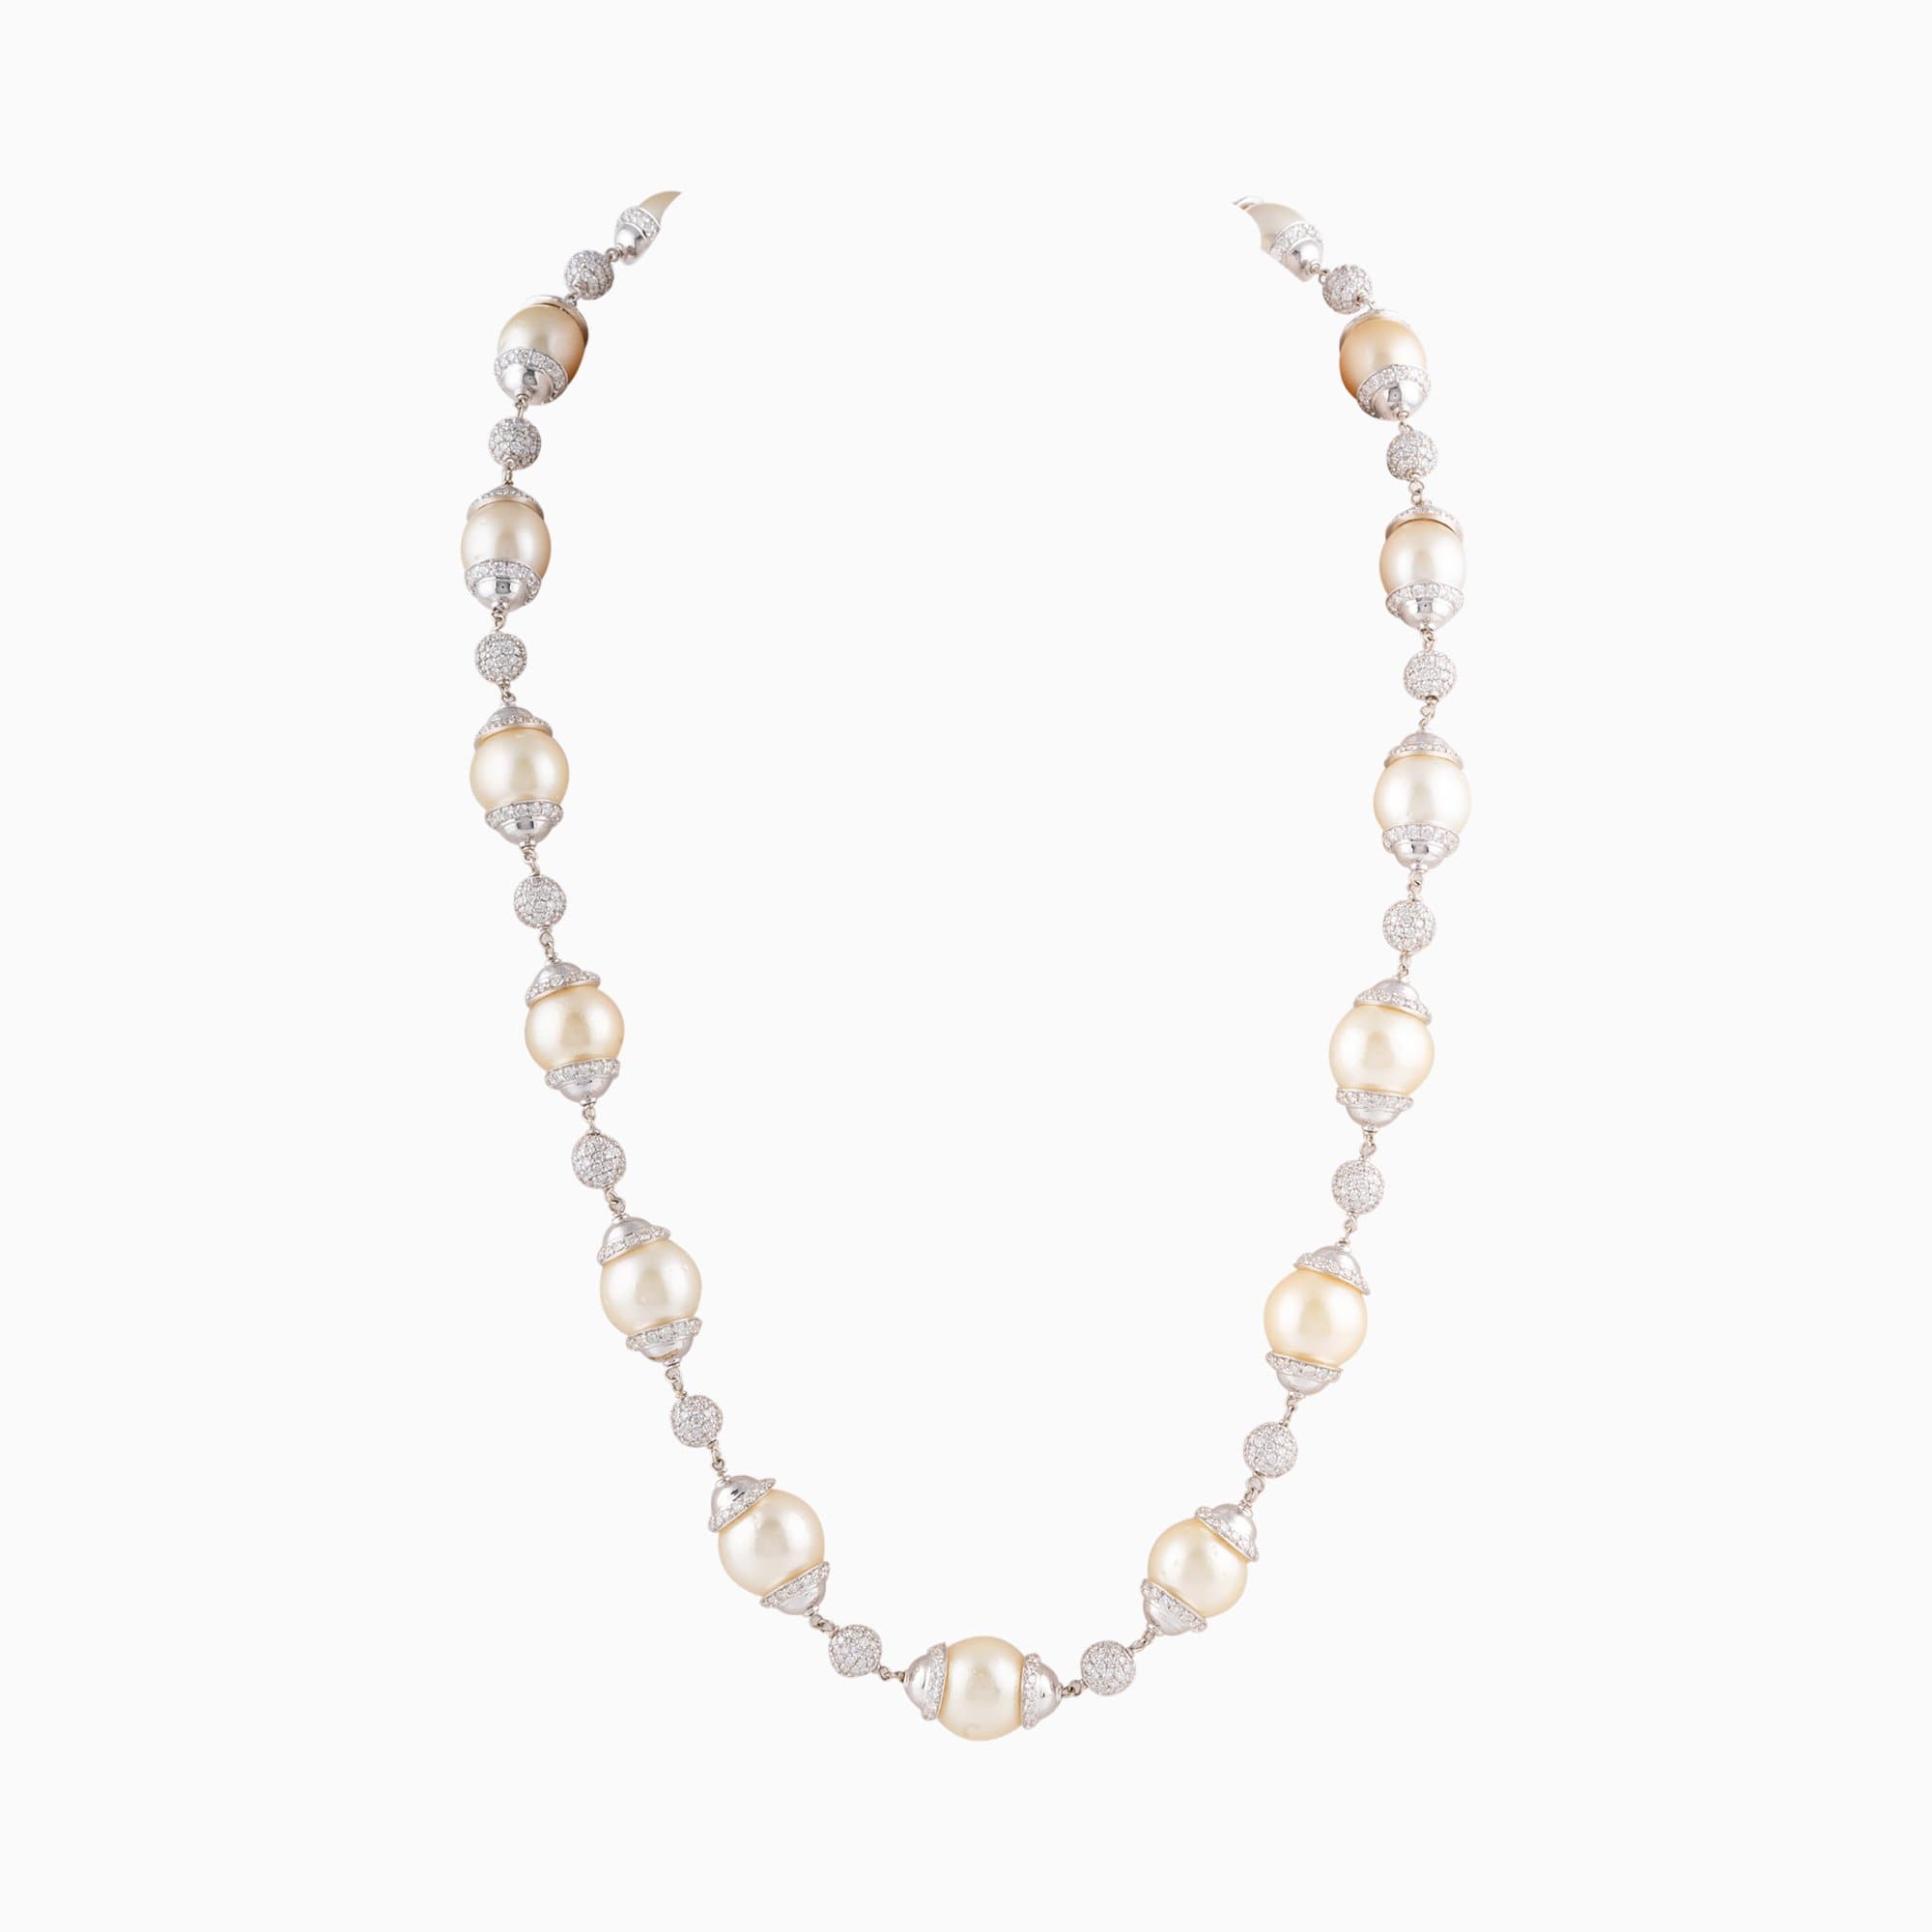 Necklace with Round Cut Diamond and S.S. Pearls with Gold Links-WDN063